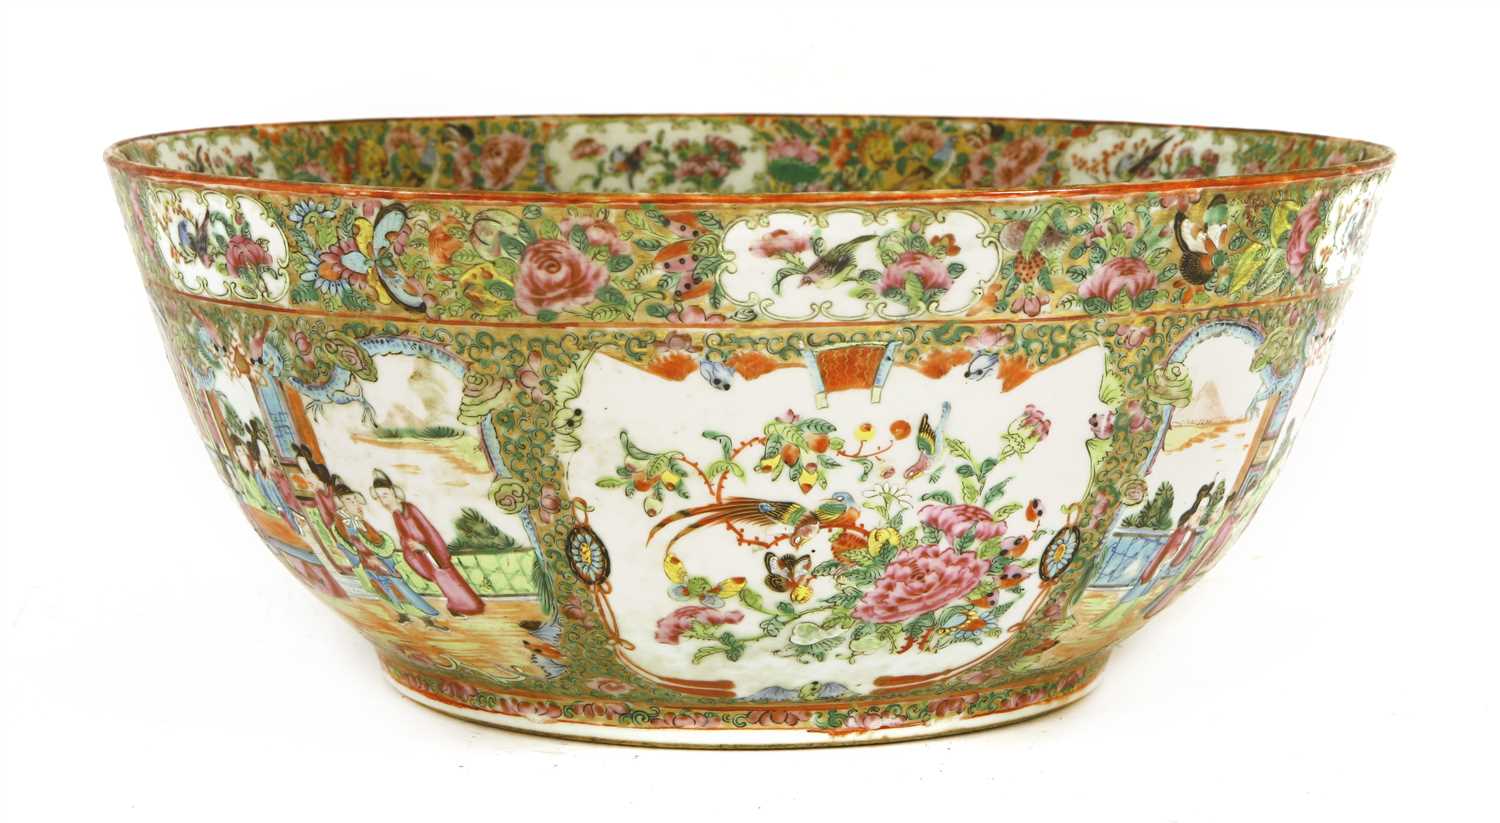 Lot 45 - A large Chinese Canton enamelled famille rose punch bowl